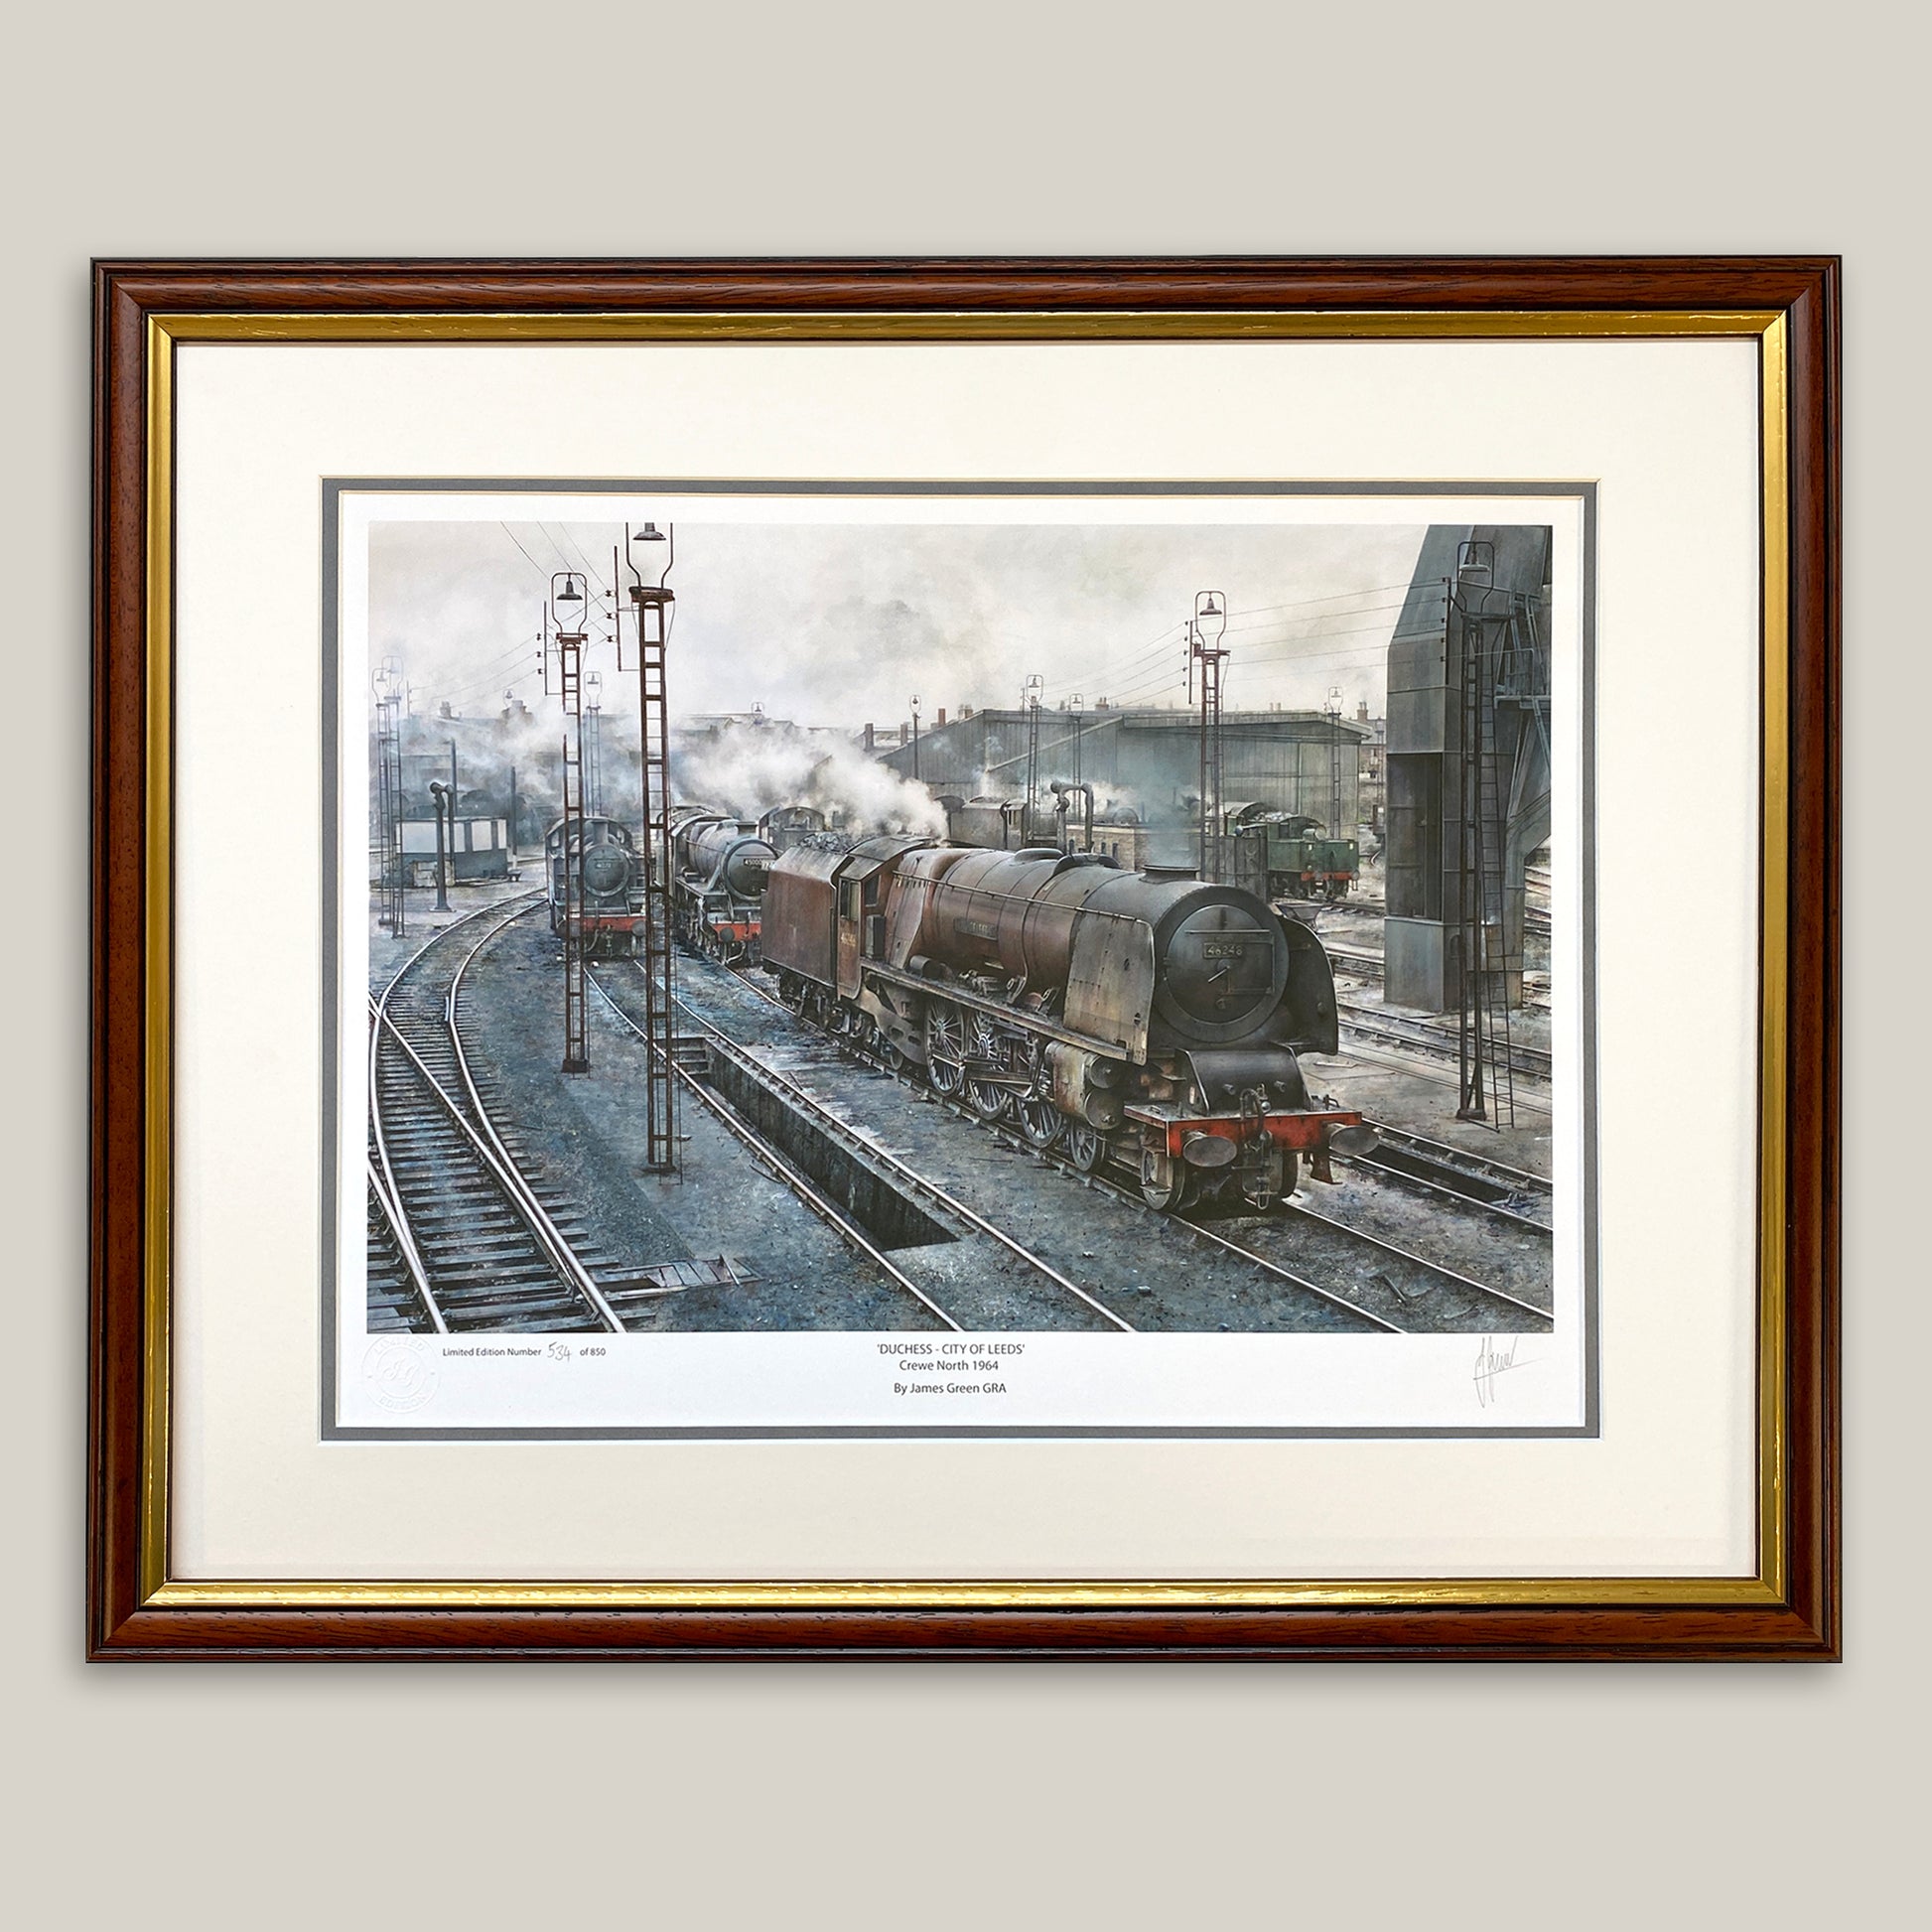 framed railway print of Duchess City of Leeds at Crewe North in 1964